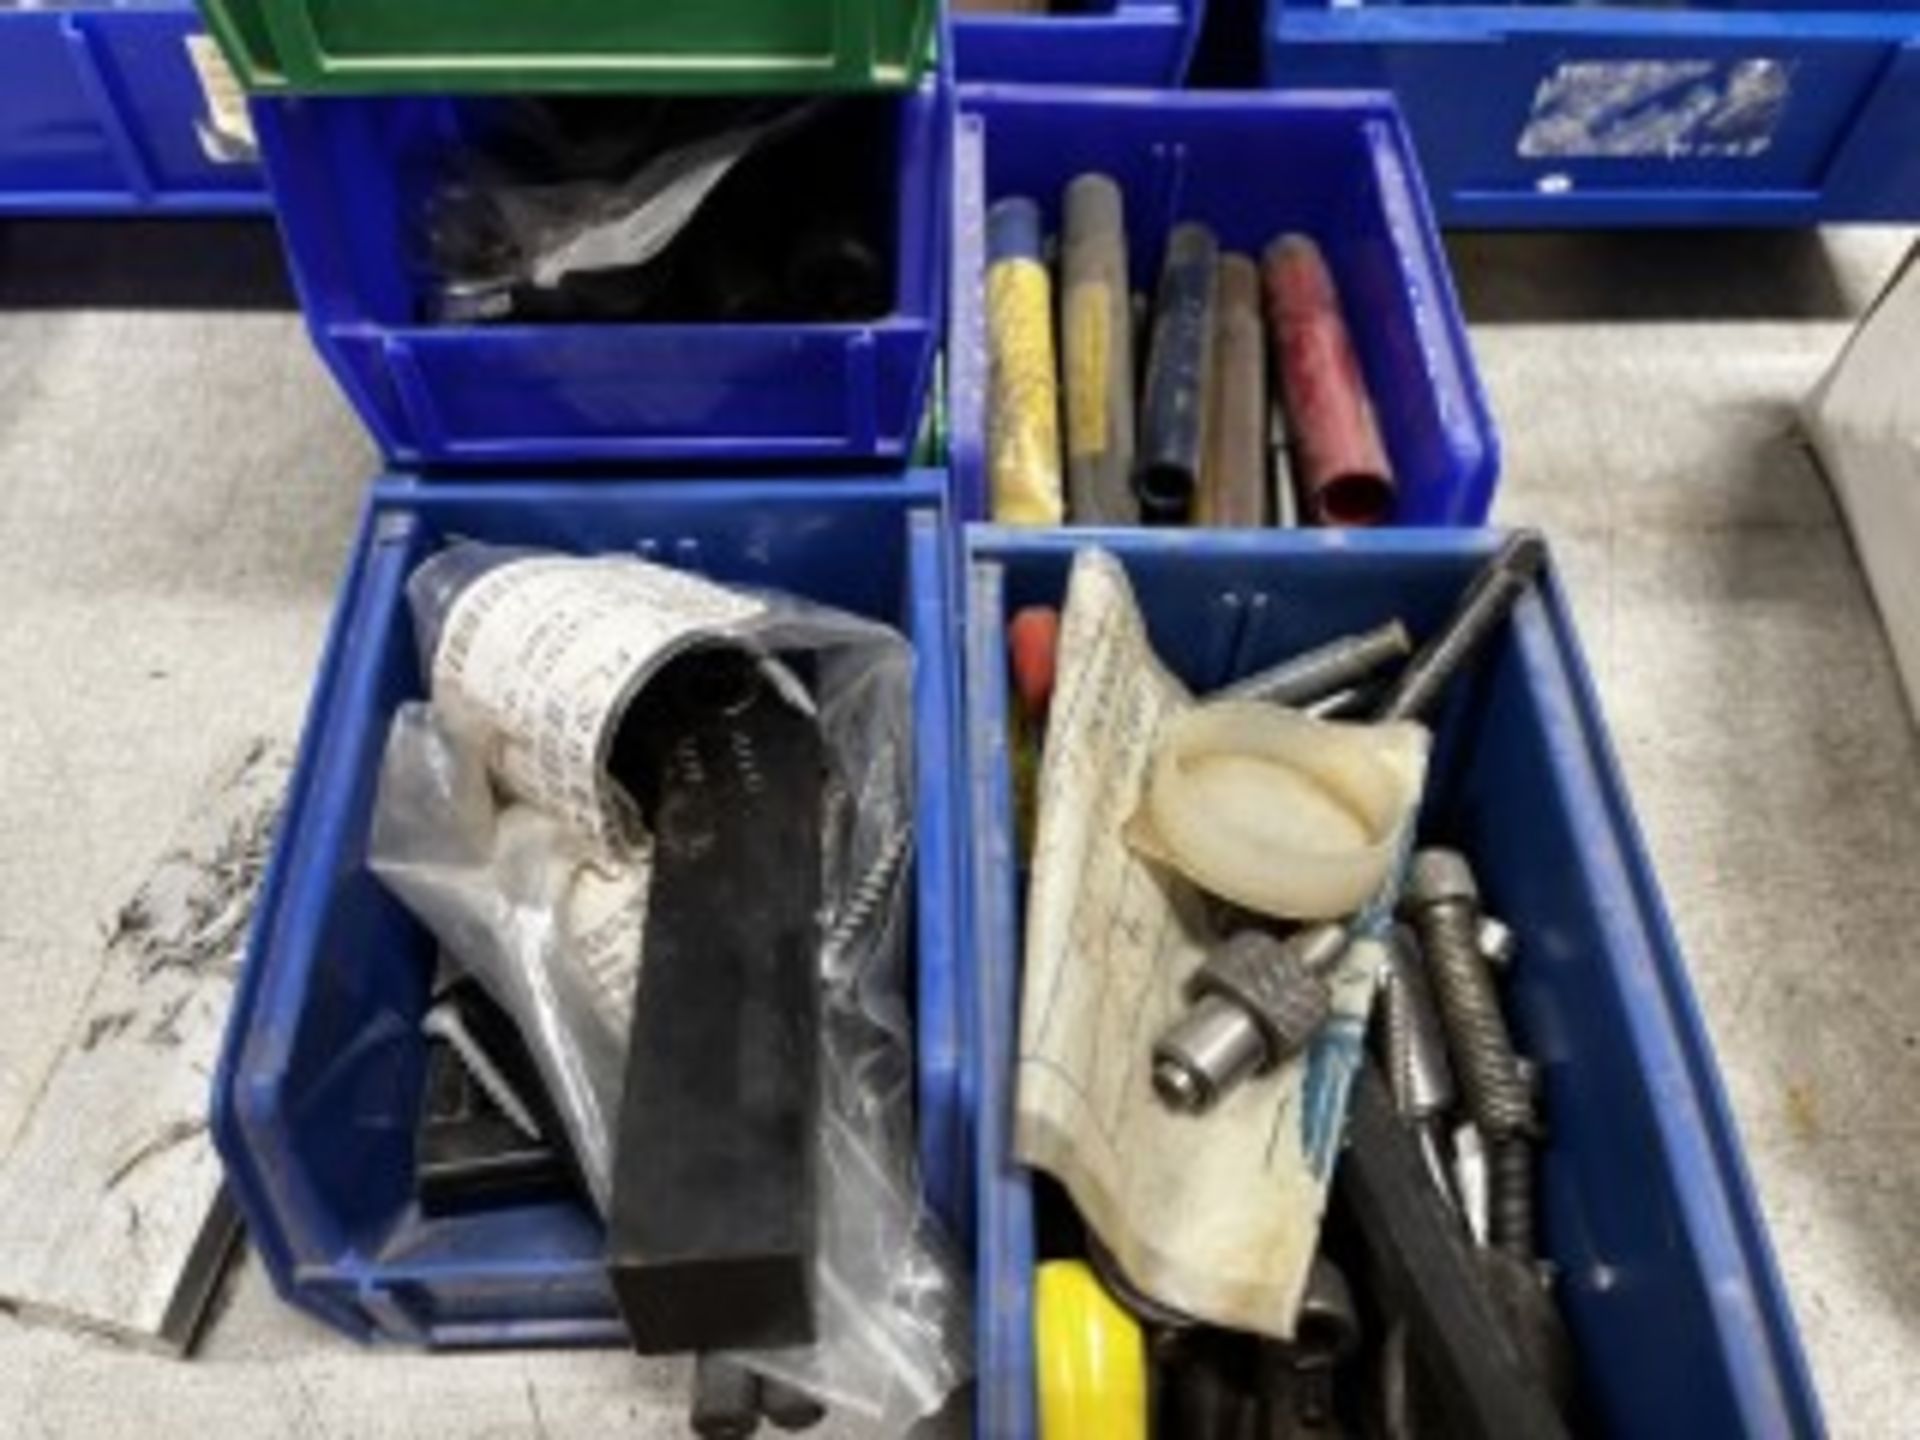 BOXES ASSORTED TOOLS, BOLTS, WASHERS, EXTRA LARGE DRILL BITS, ETC - Image 5 of 5